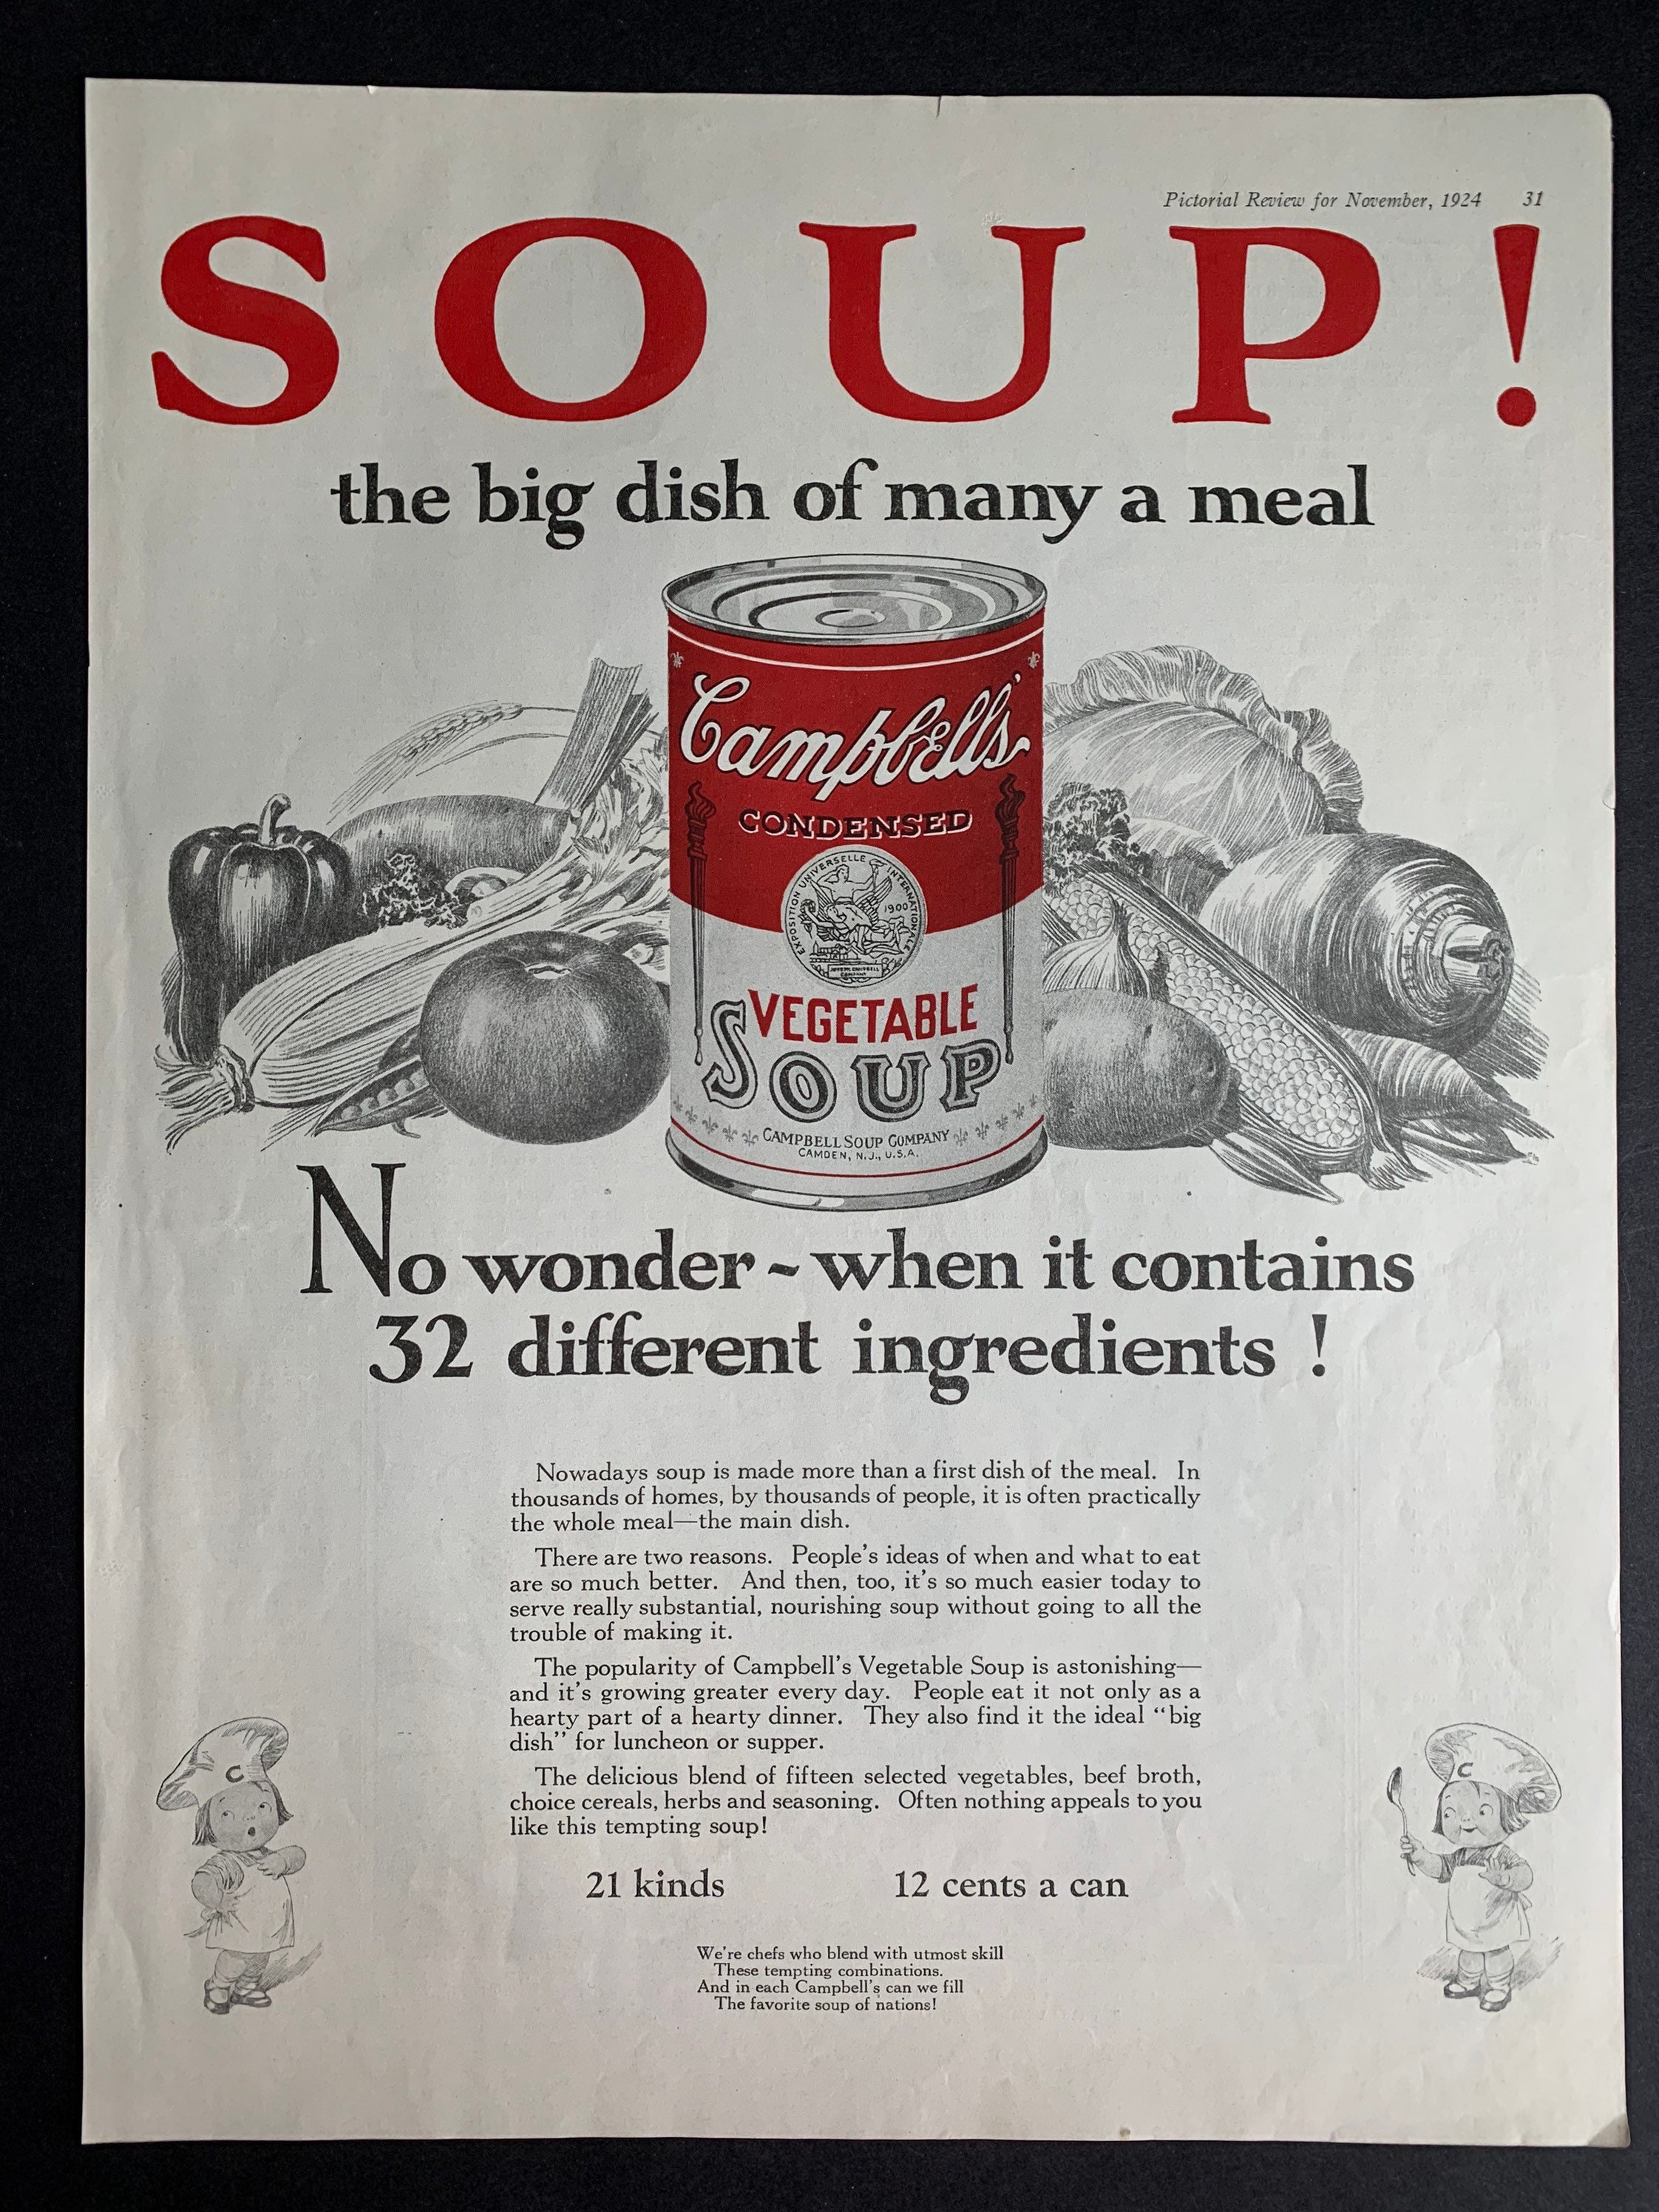 Vintage 1924 Campbell's Vegetable Soup Print Ad